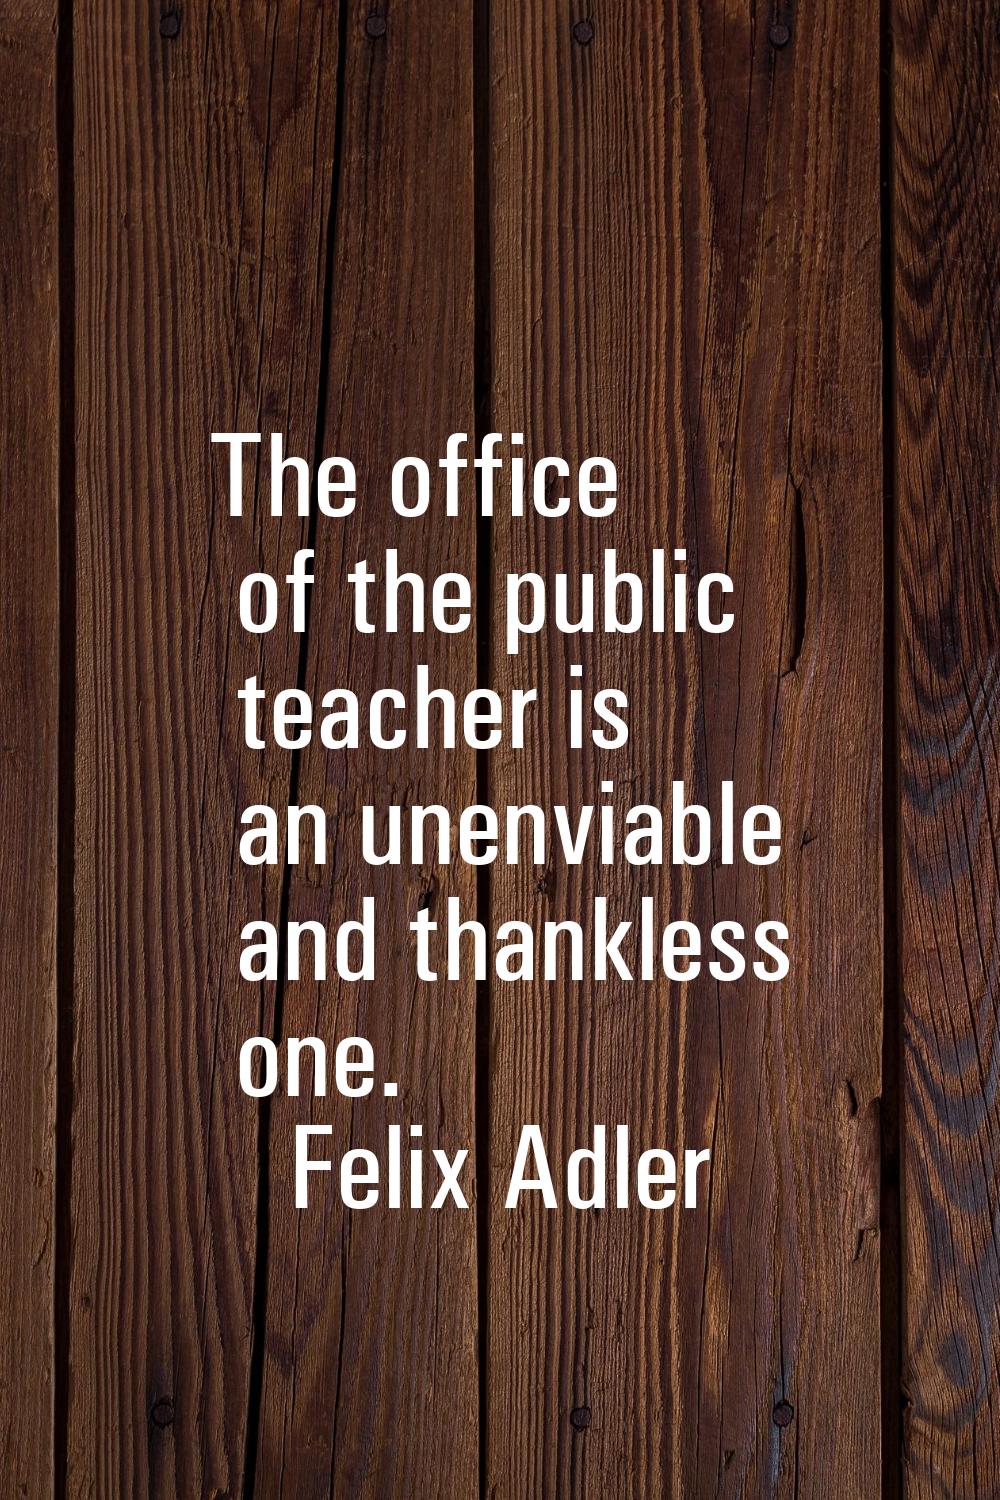 The office of the public teacher is an unenviable and thankless one.